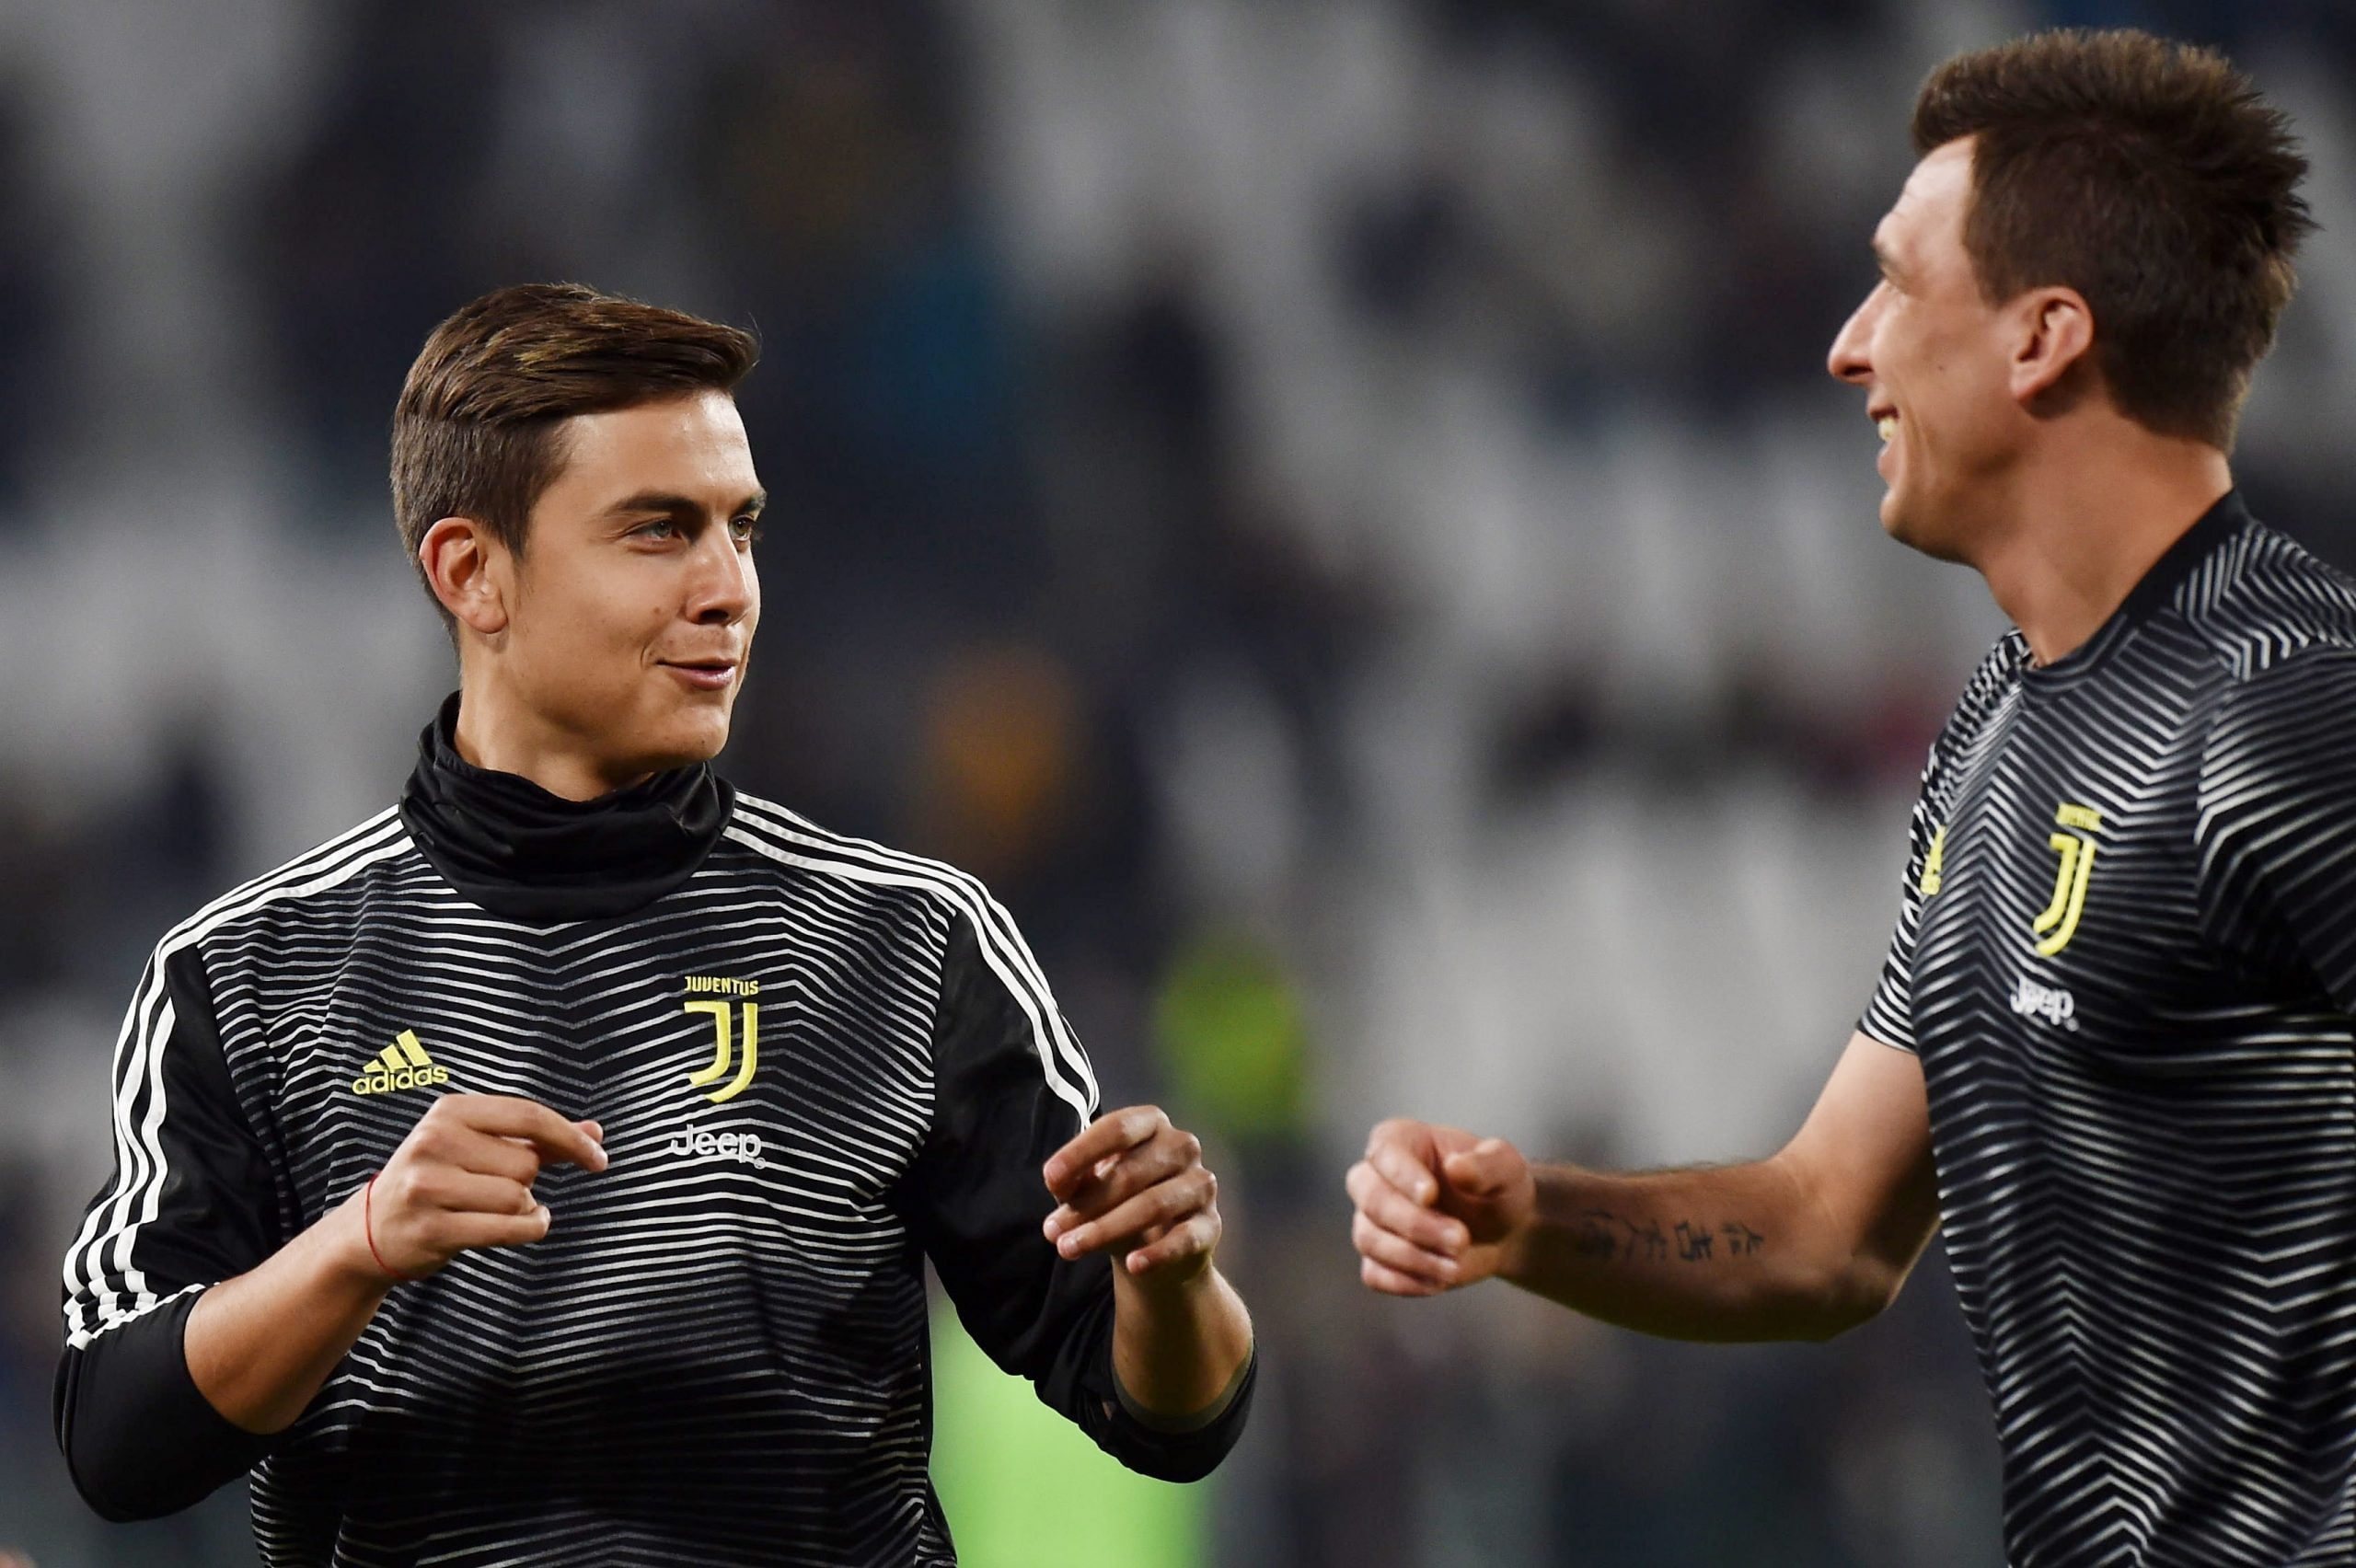 Journalist provides update on Chelsea's pursuit of Dybala who is seen in the picture